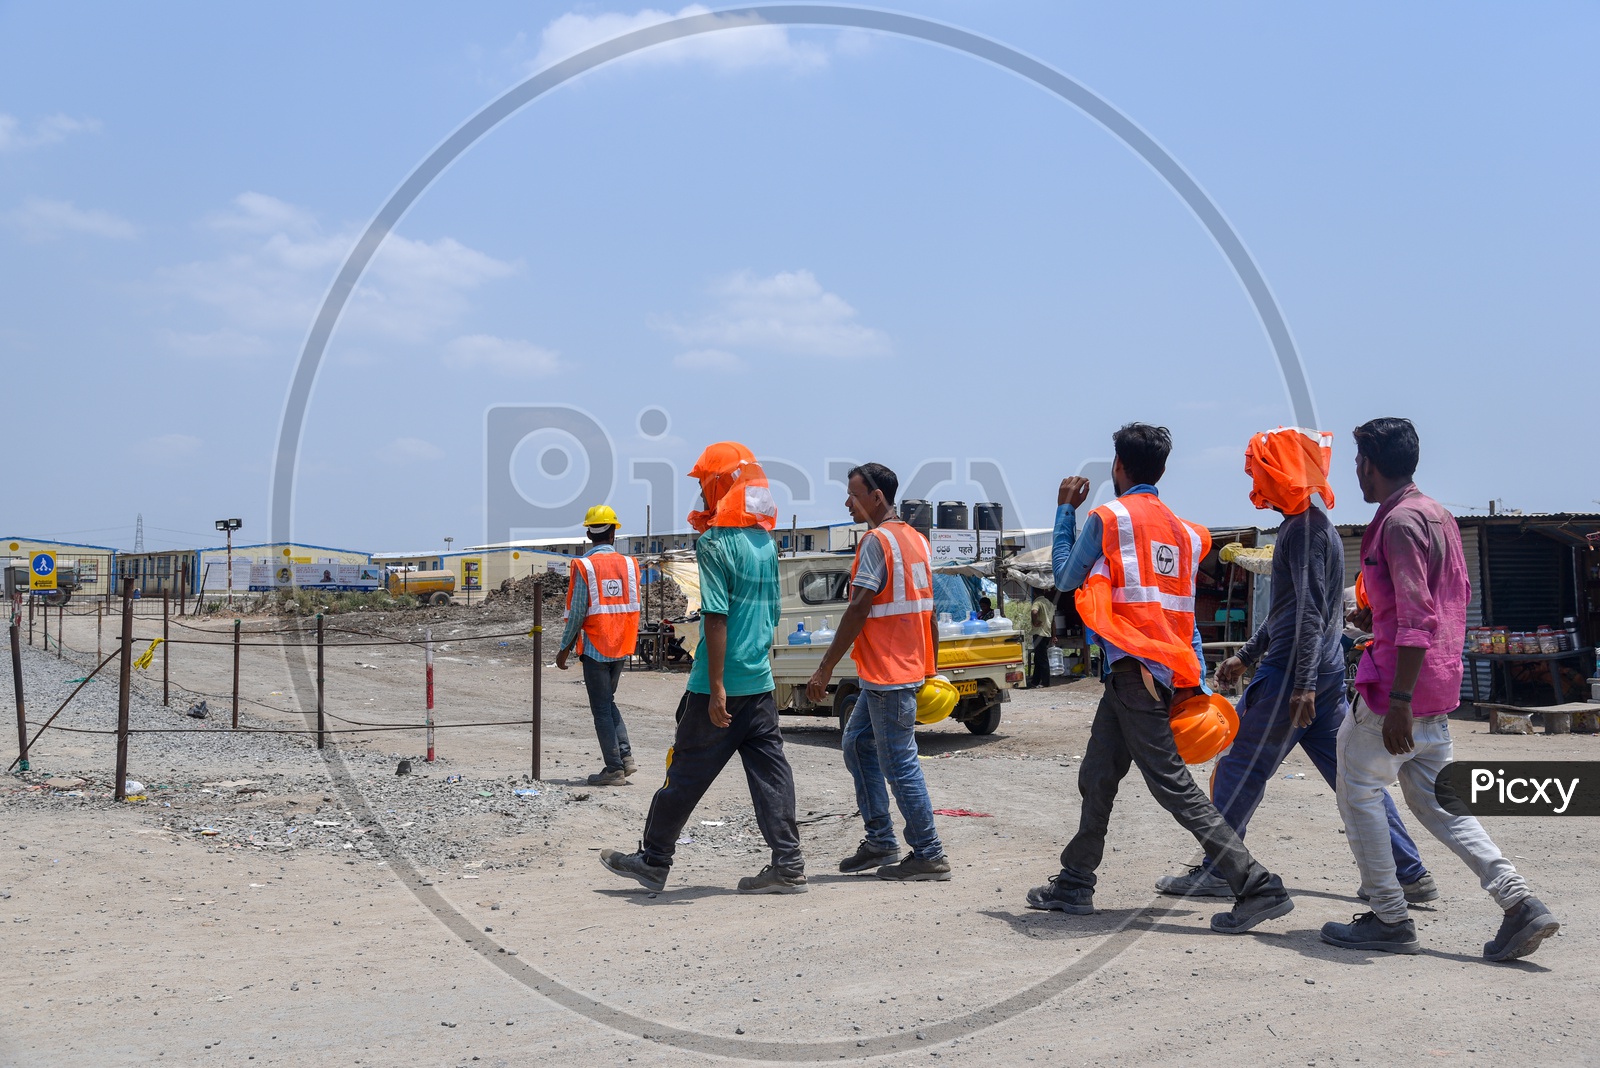 Construction Company Workers Wearing Safety Helmet and Reflective Safety Vest At Construction Company Working Site